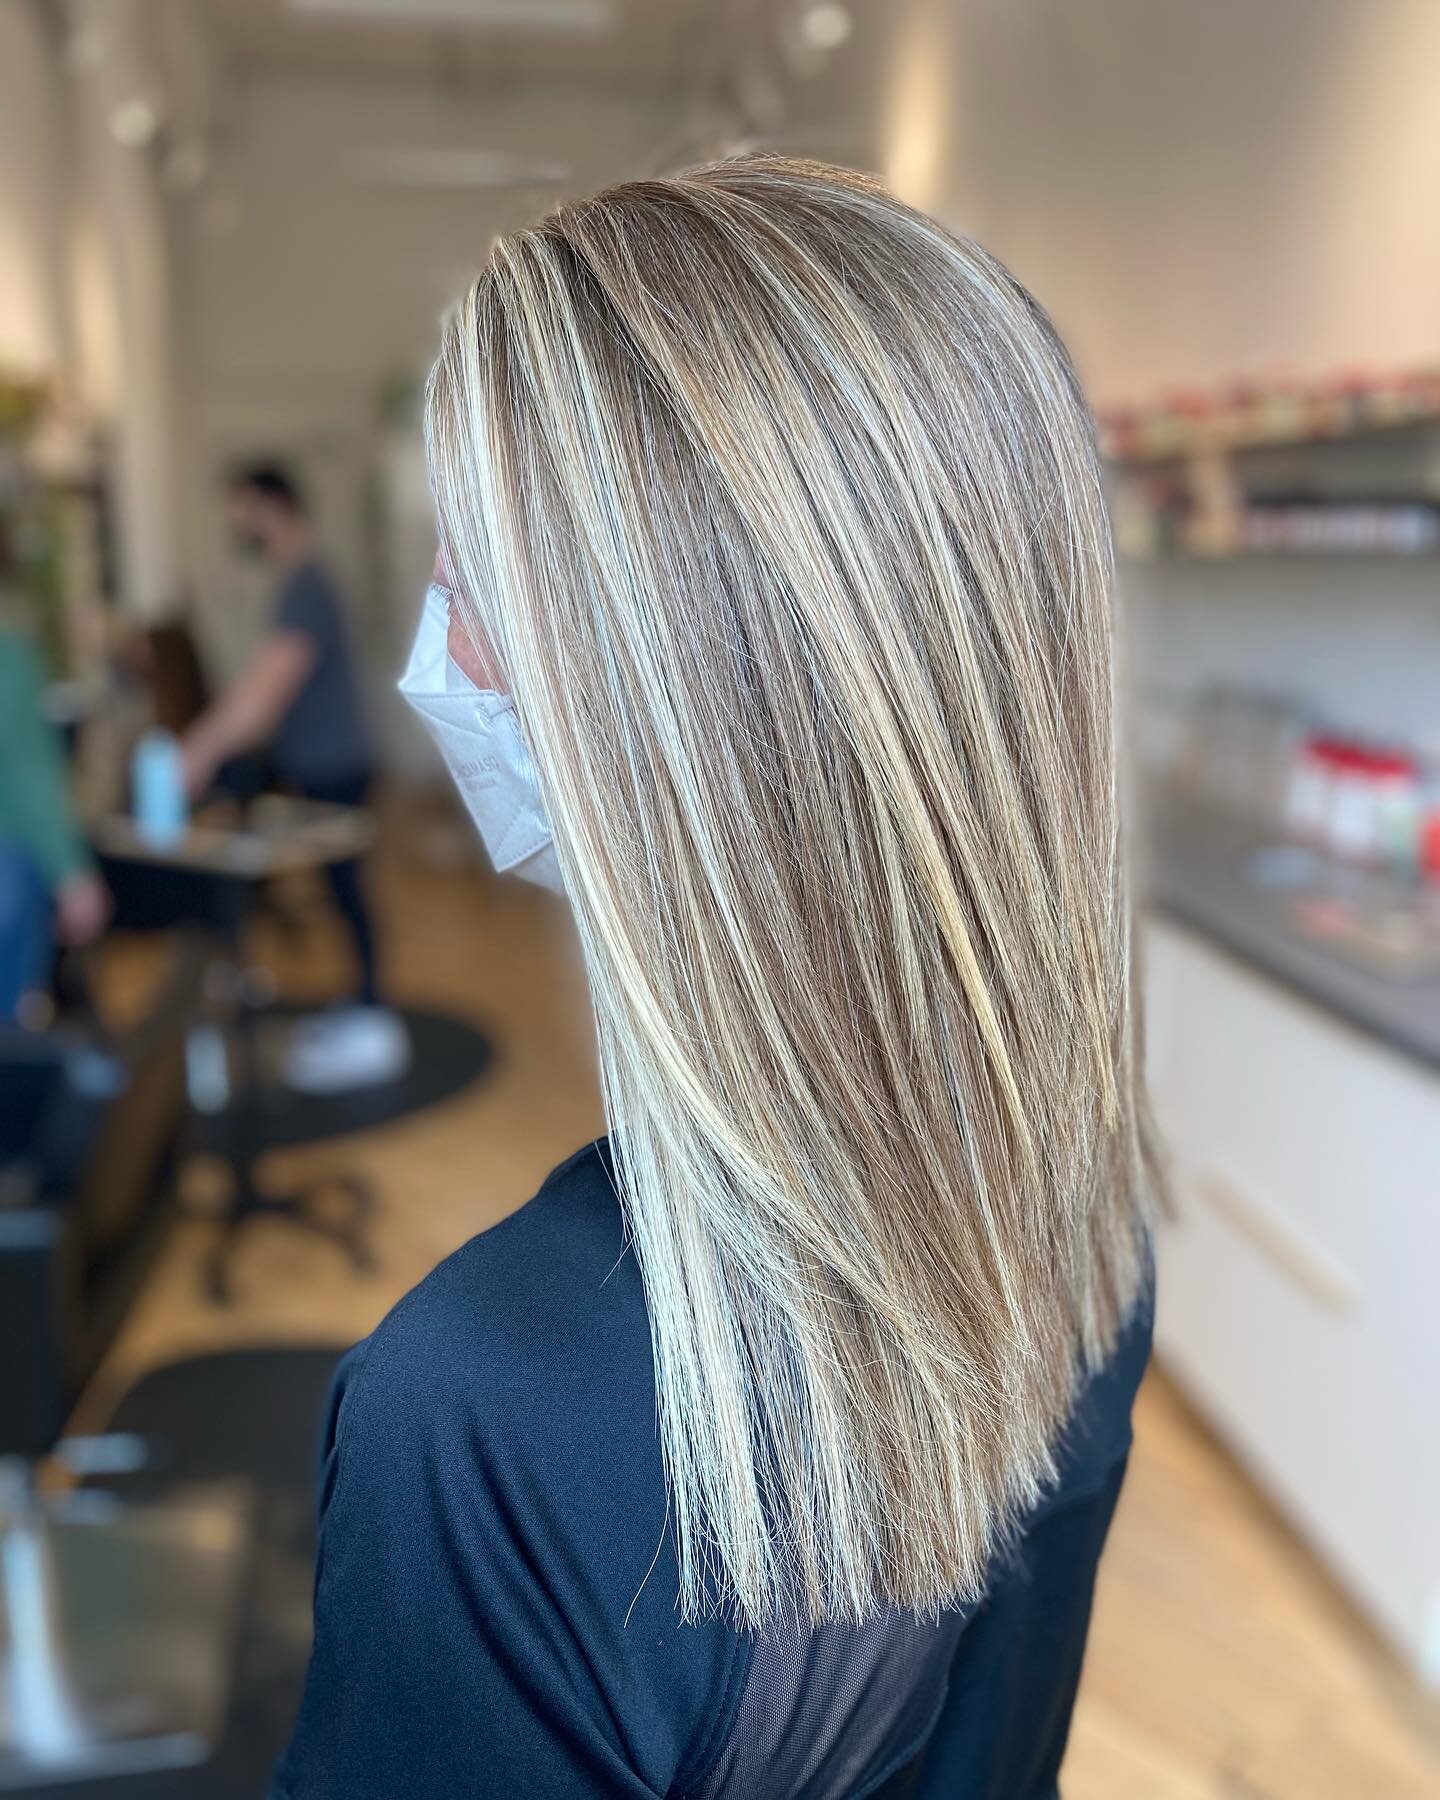 ✨ Blonde balayage ✨

☑️ effortless grow out 

☑️ hang out with Alexis &amp; Daniel for 5 hours while we do your balayage 🥰 

☑️ refresh your colour easily with a toner appointment every 6-10 weeks (takes 45 minutes) 

☑️ looks great straight, wavy a